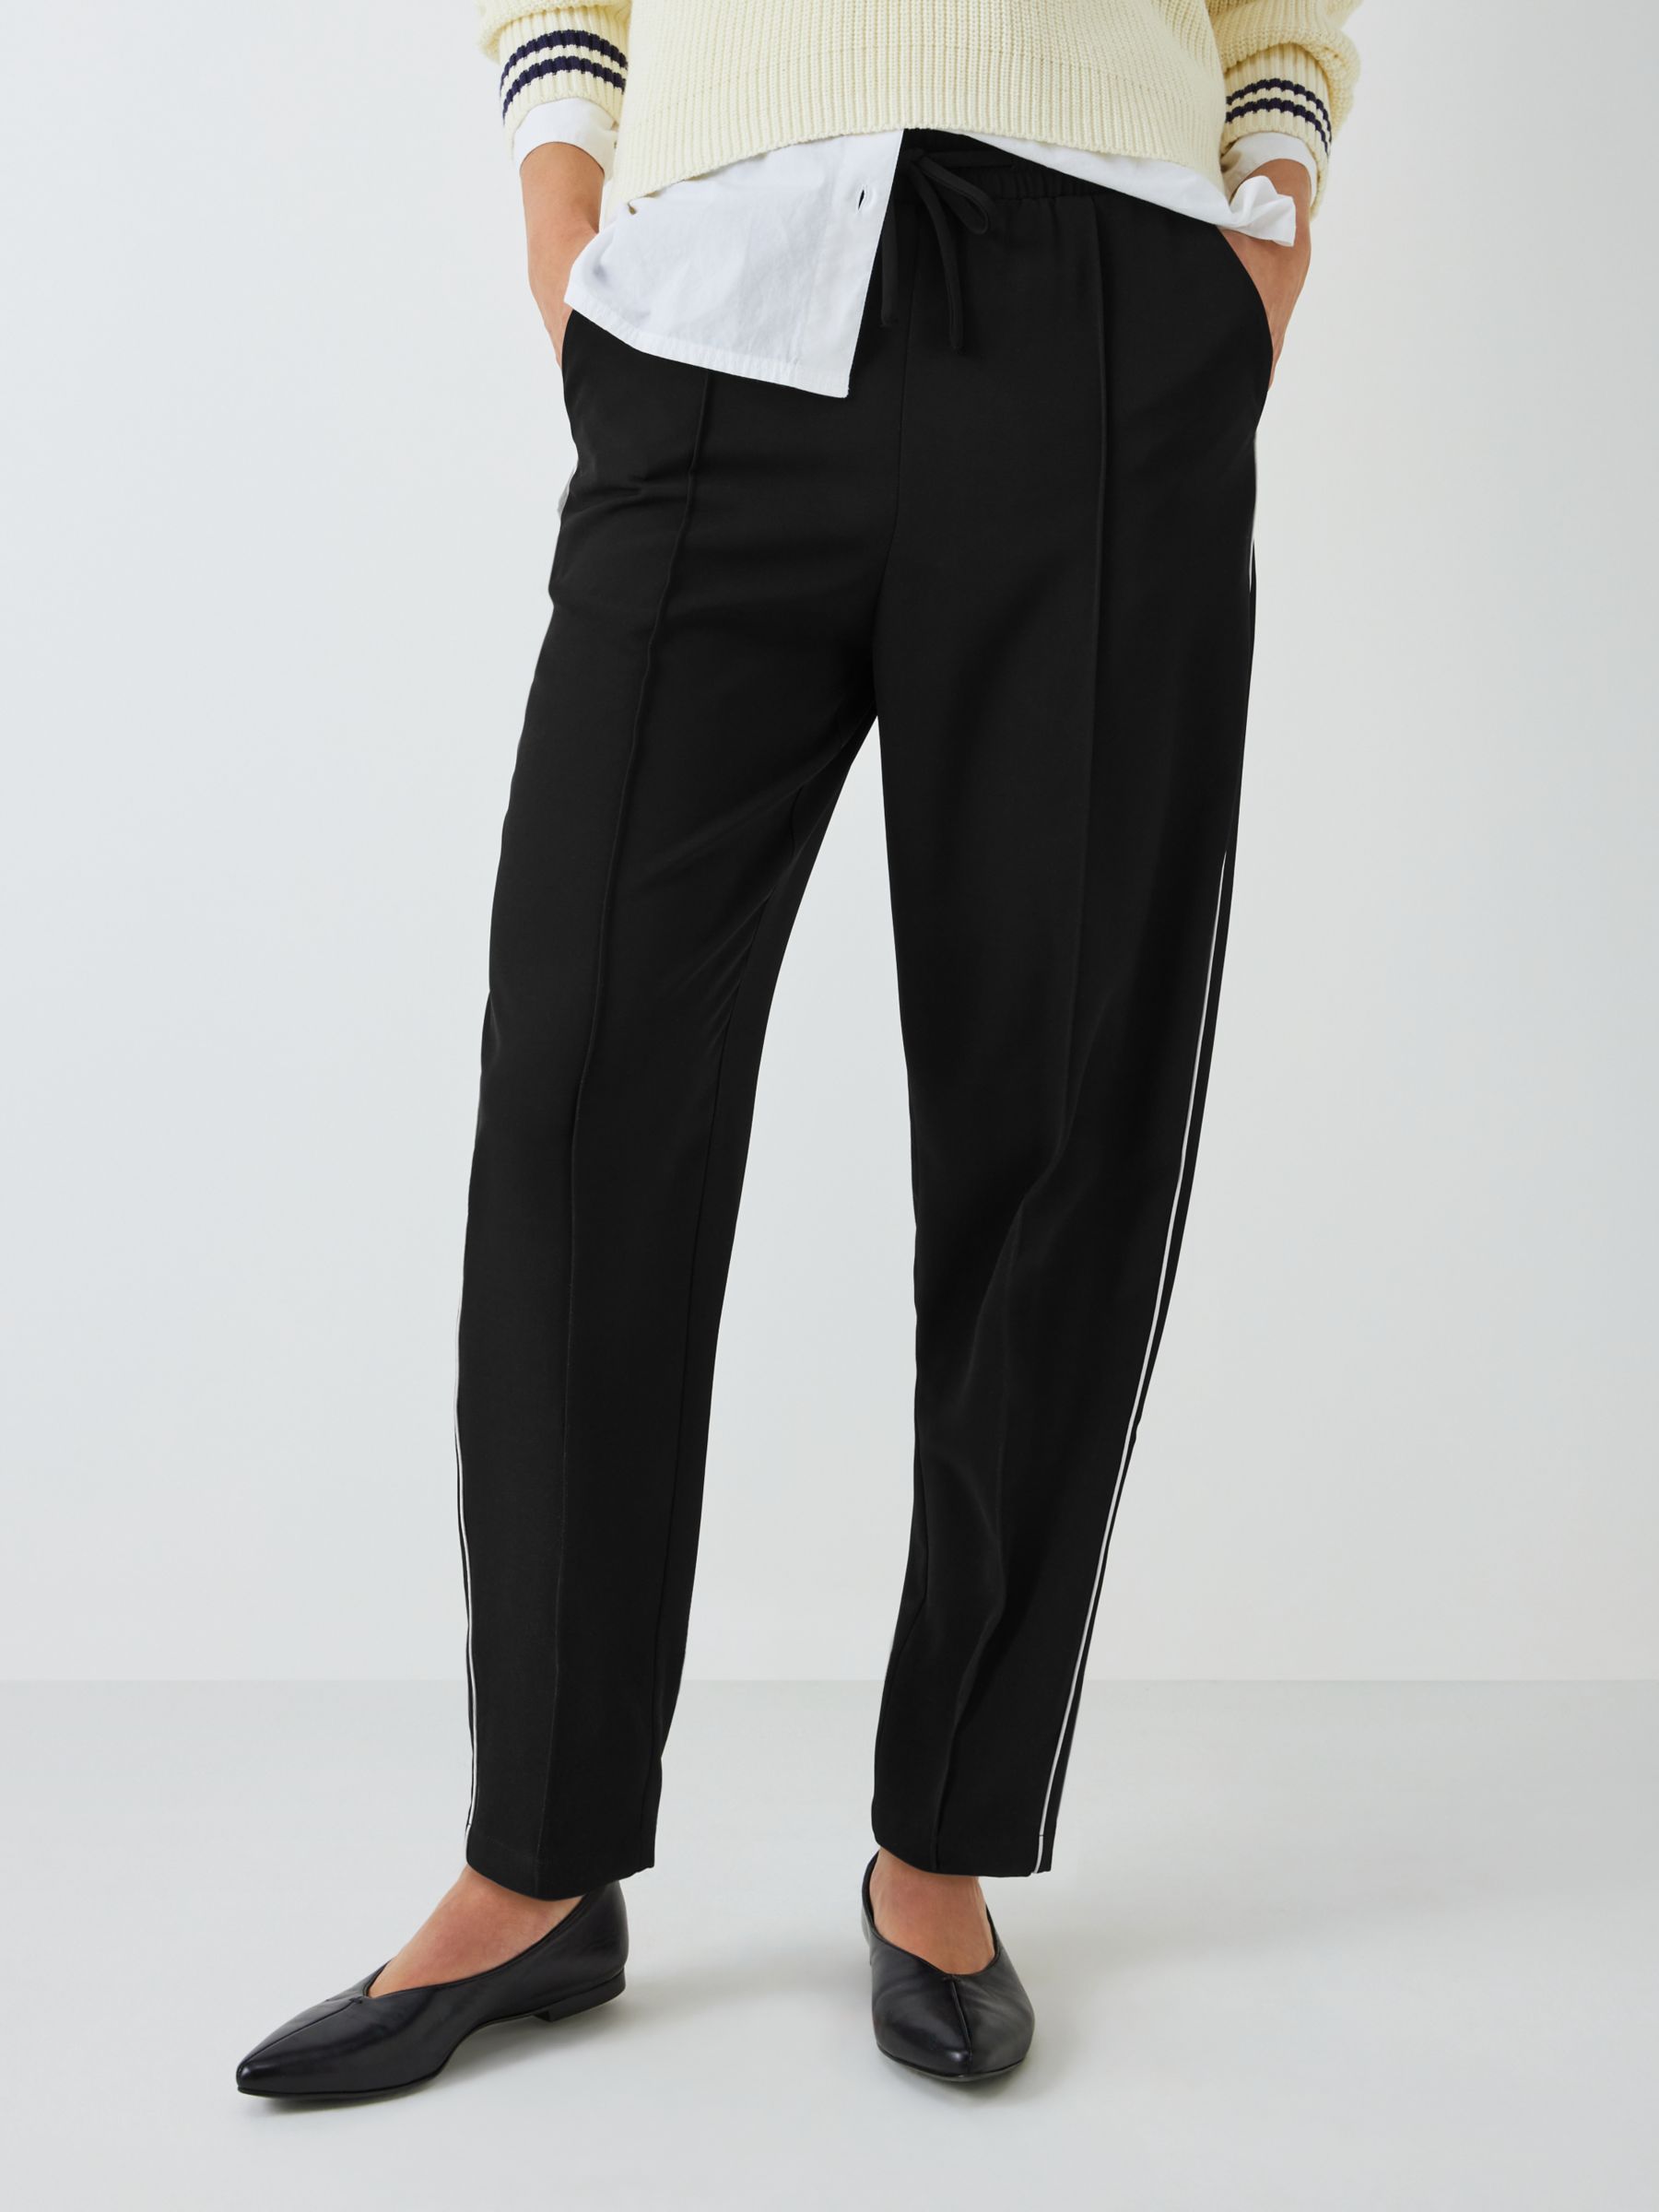 Hobbs Stevie Plain Tailored Tapered Trousers, Navy at John Lewis & Partners